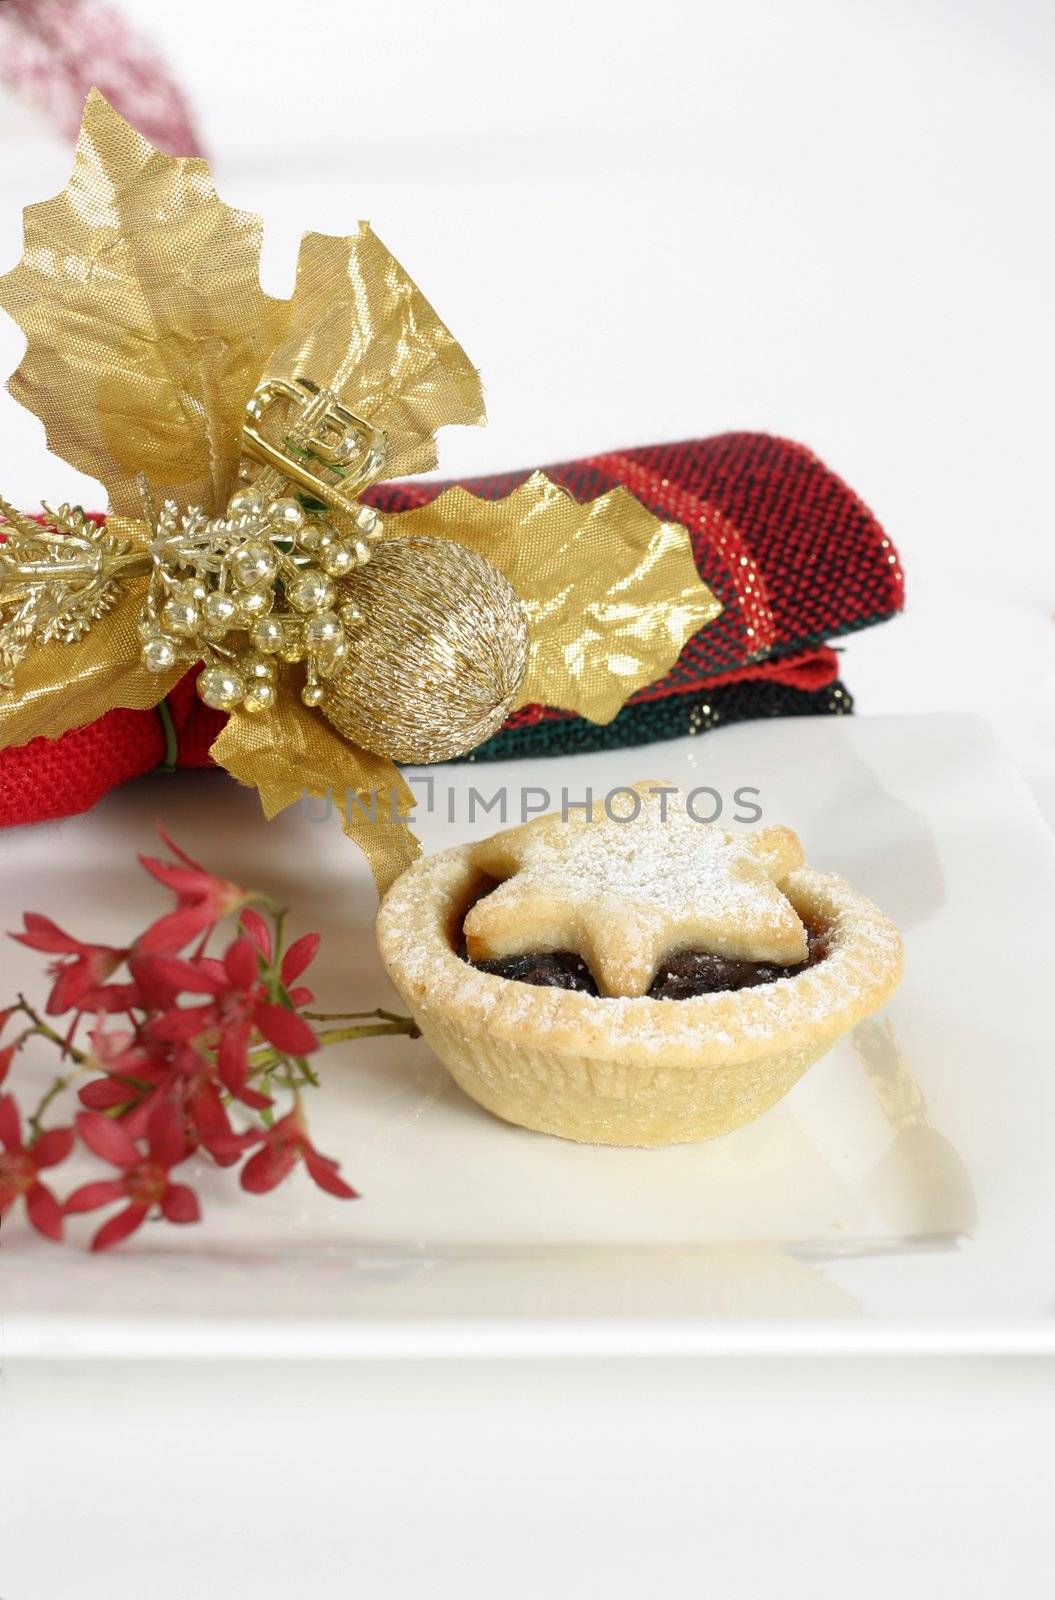 Fruit mince pie on a plate adorned with Australian Christmas bush and napkin.